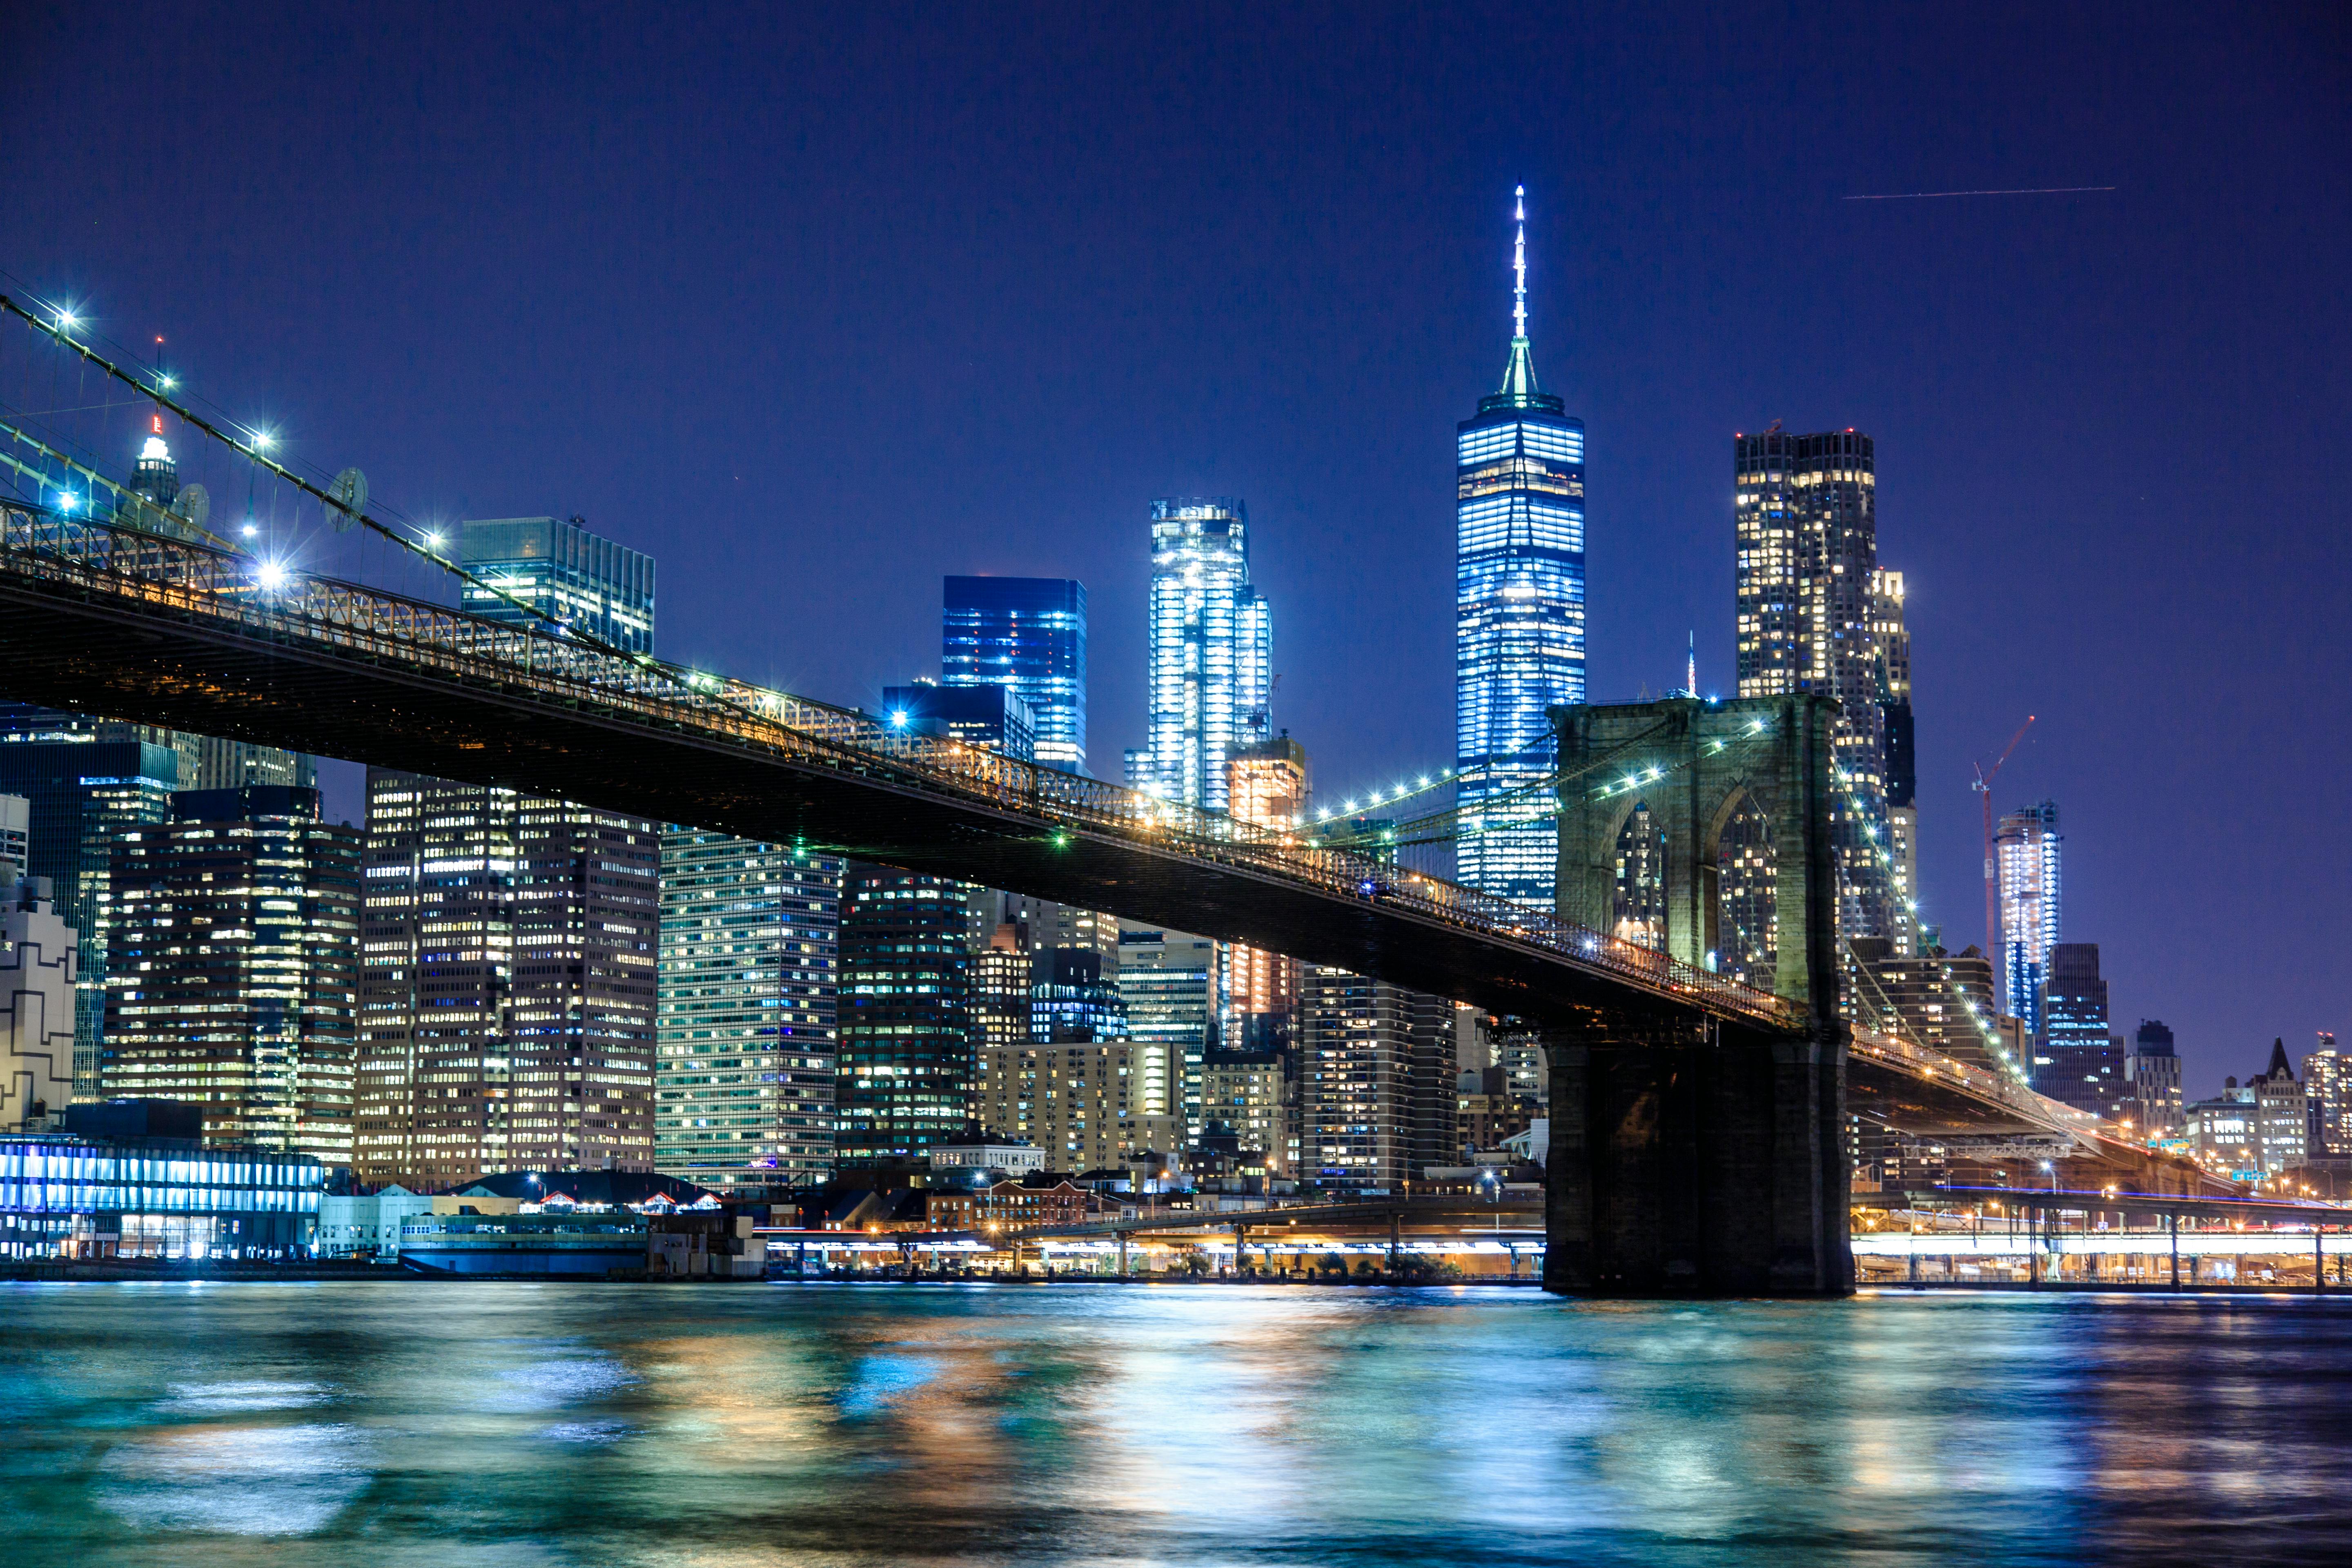 New York Photos, Download The BEST Free New York Stock Photos & HD Images